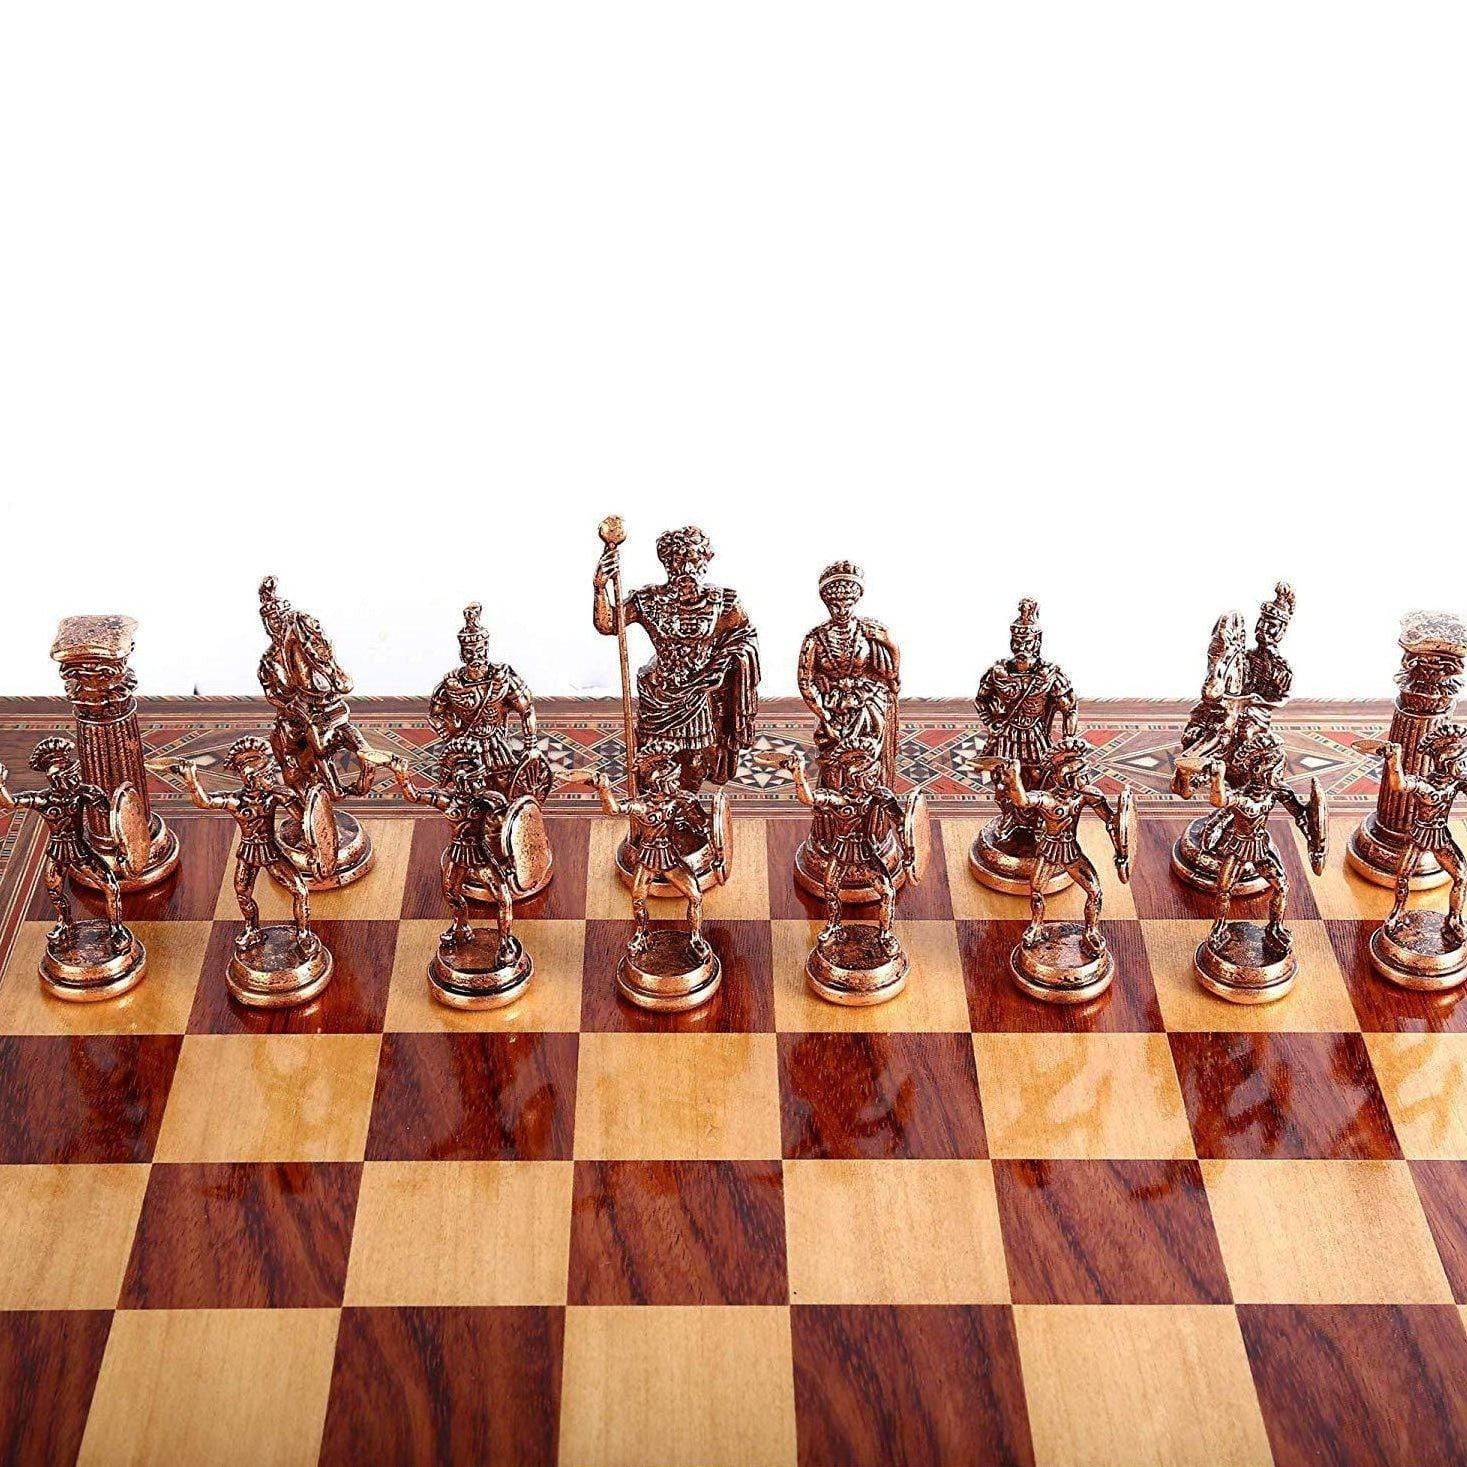 Handmade Vintage Chess Board | Wooden Board & Hand Crafted Roman Pieces | Classic Chess Board | whatagift.com.au.